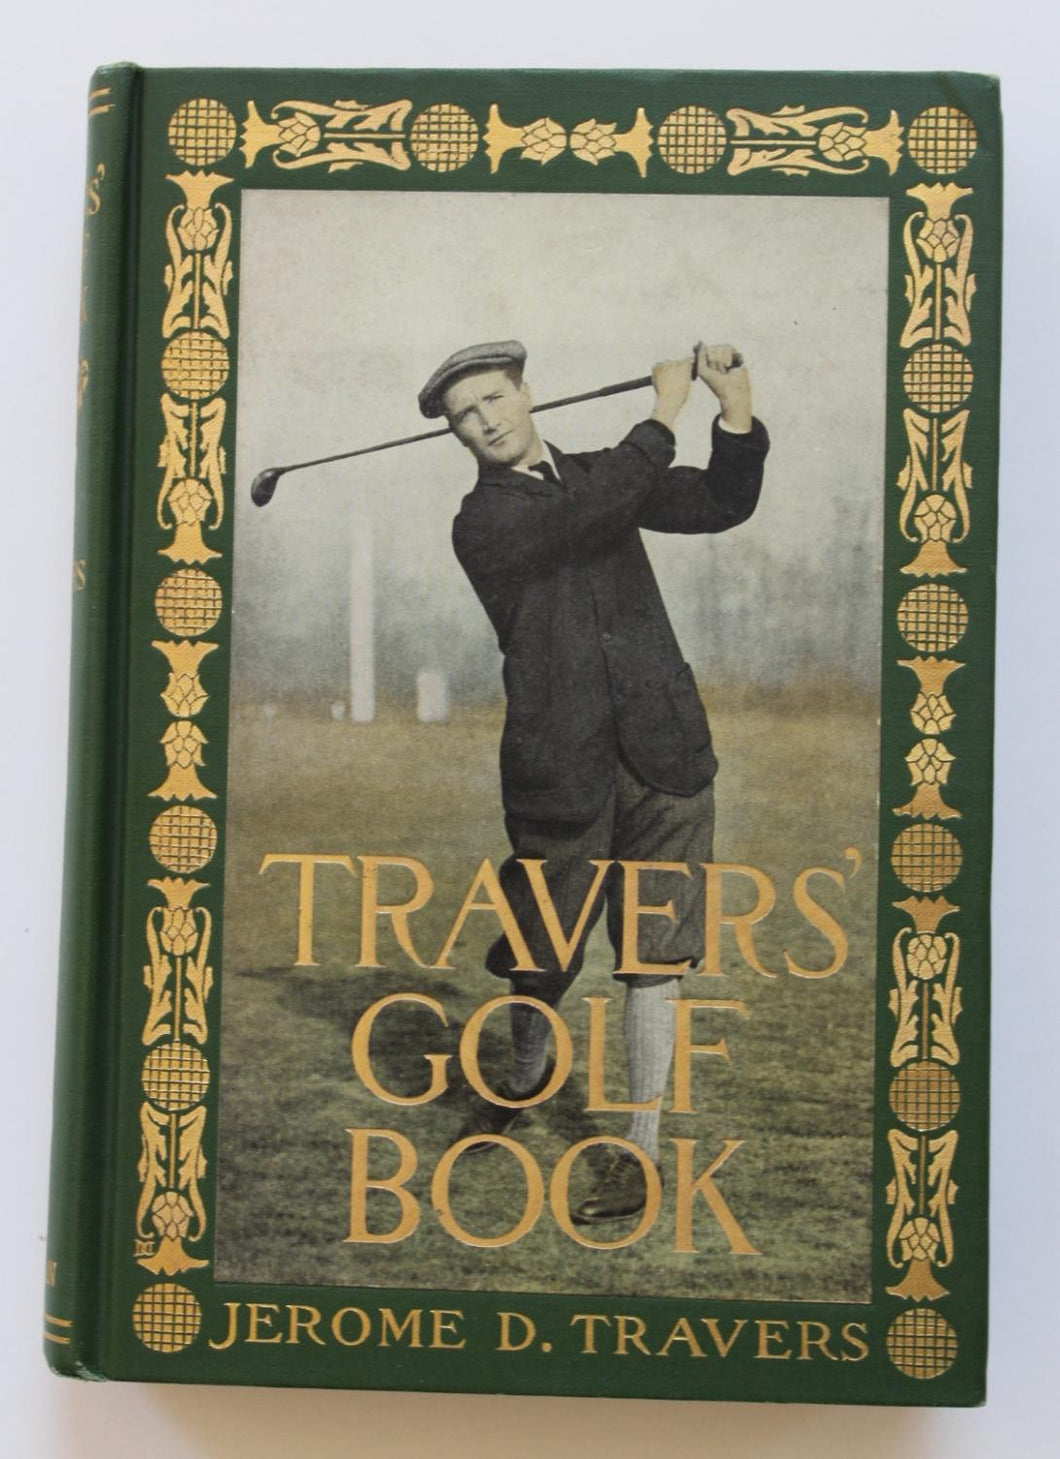 Travers Golf Book - Signed and Inscribed by the Author to President Warren G. Harding